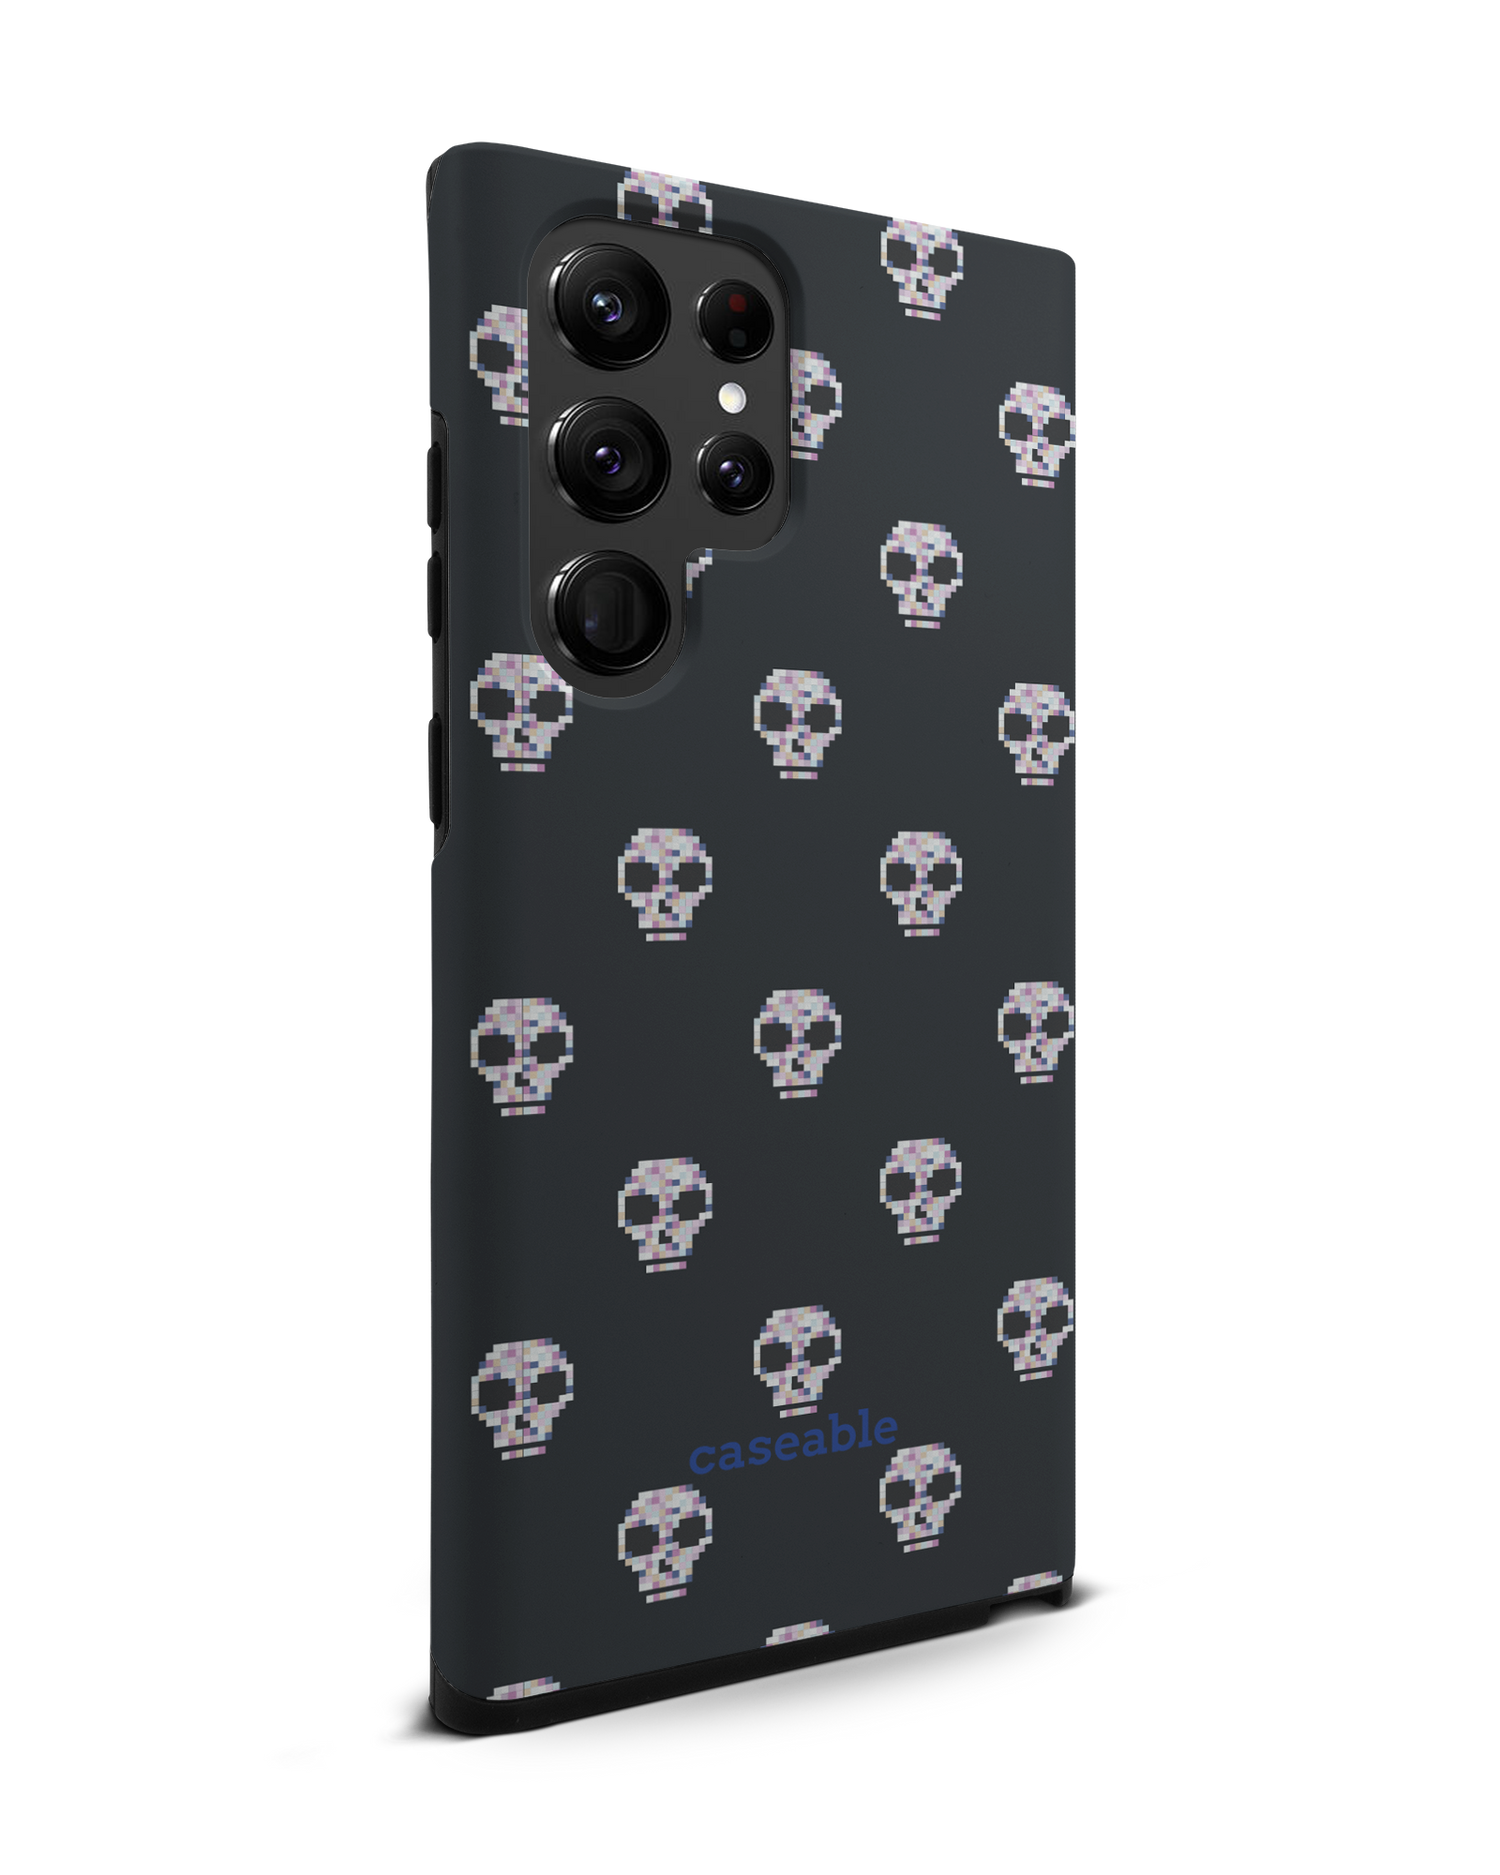 Digital Skulls Premium Phone Case Samsung Galaxy S22 Ultra 5G: View from the left side